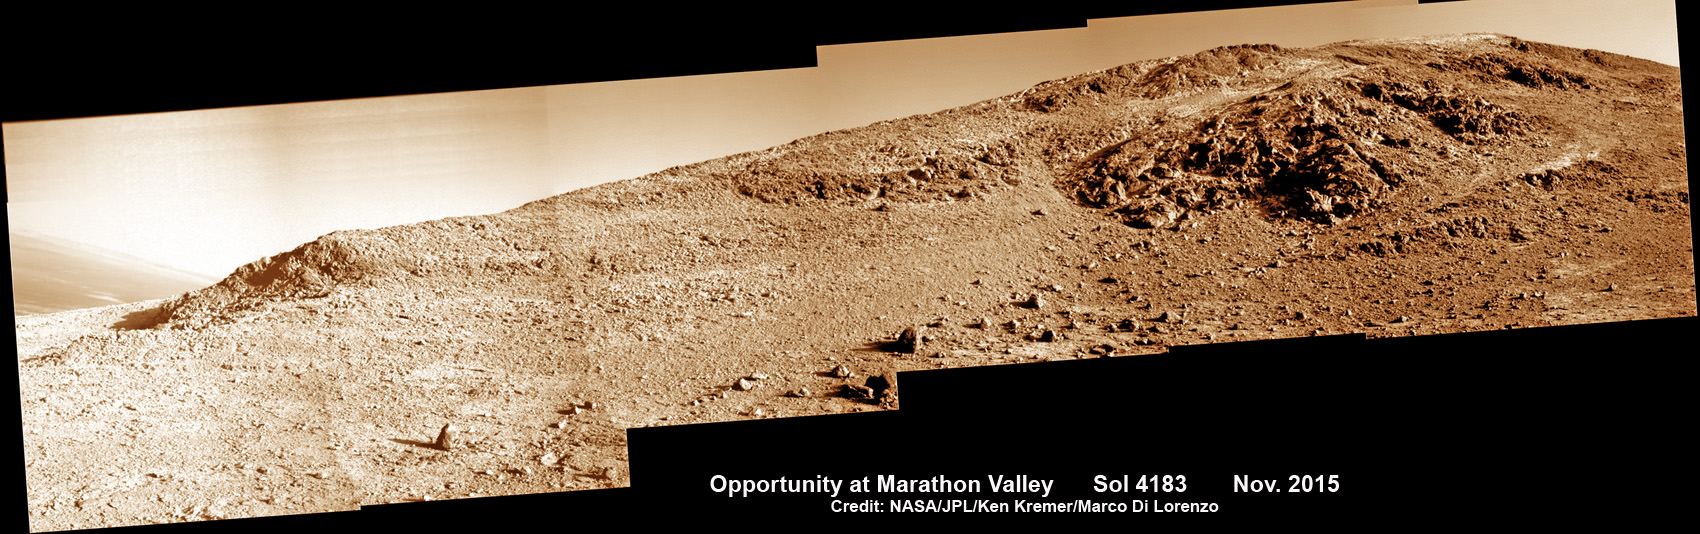 NASA’s Opportunity rover snaps panoramic view of rock outcrop and the sun facing southern wall of Marathon Valley from current location in early November 2015.  This pancam camera photo mosaic was assembled from images taken on Sol 4182 and 4183 (Oct. 29 and 30, 2015) and colorized.  Endeavour crater floor seen at far left.  Credit: NASA/JPL/Cornell/Ken Kremer/kenkremer.com/Marco Di Lorenzo